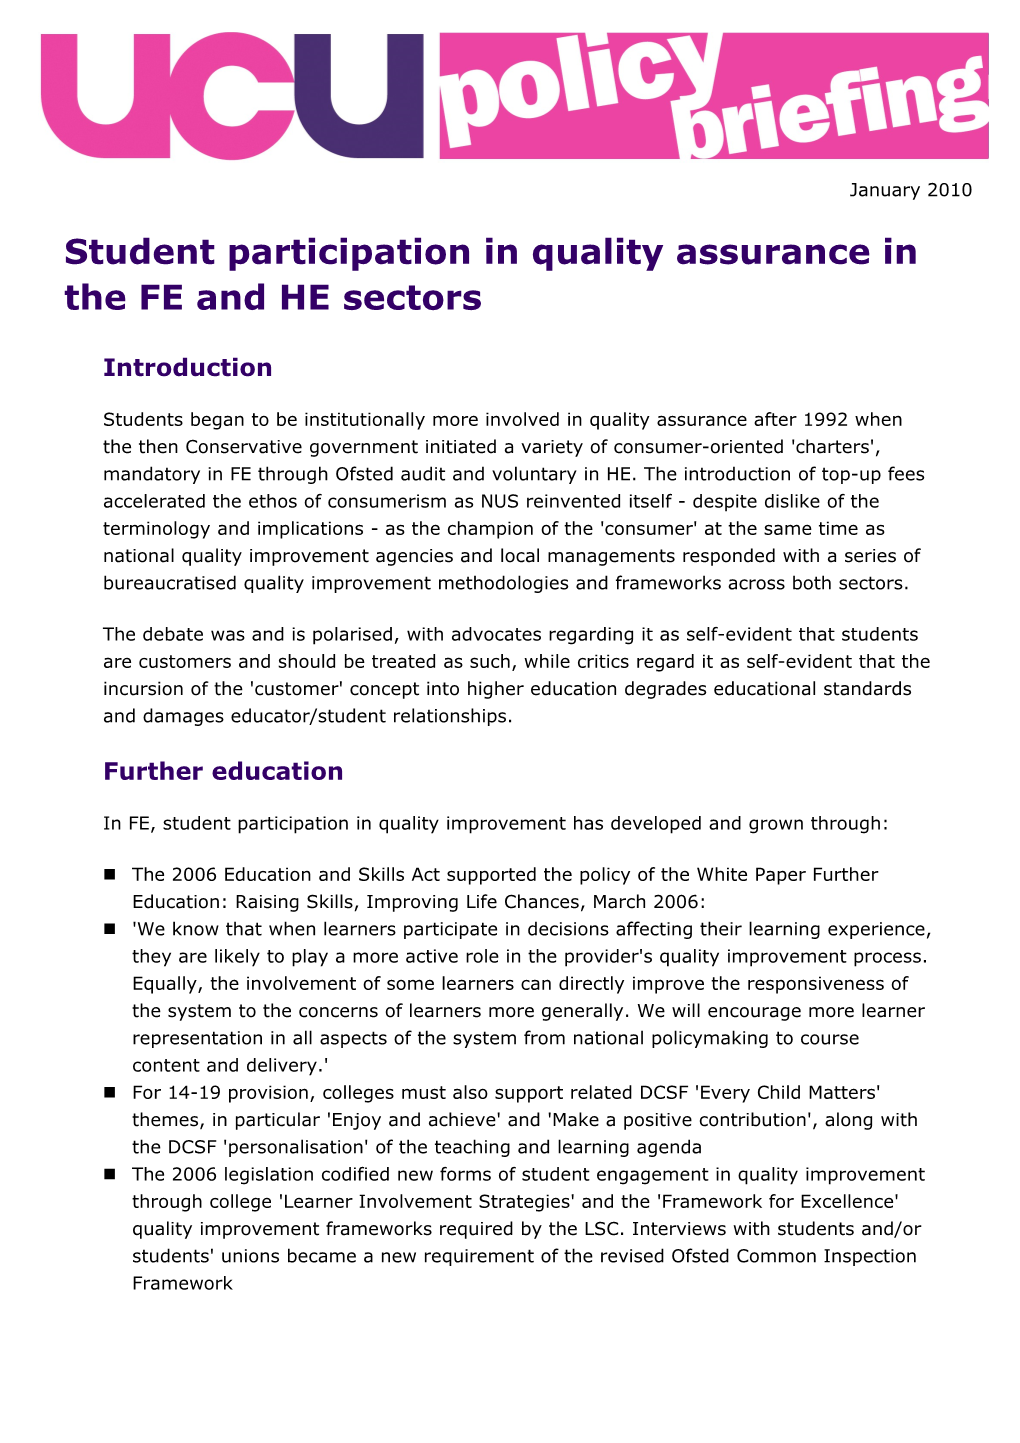 Student Participation in Quality Assurance in the FE and HE Sectors